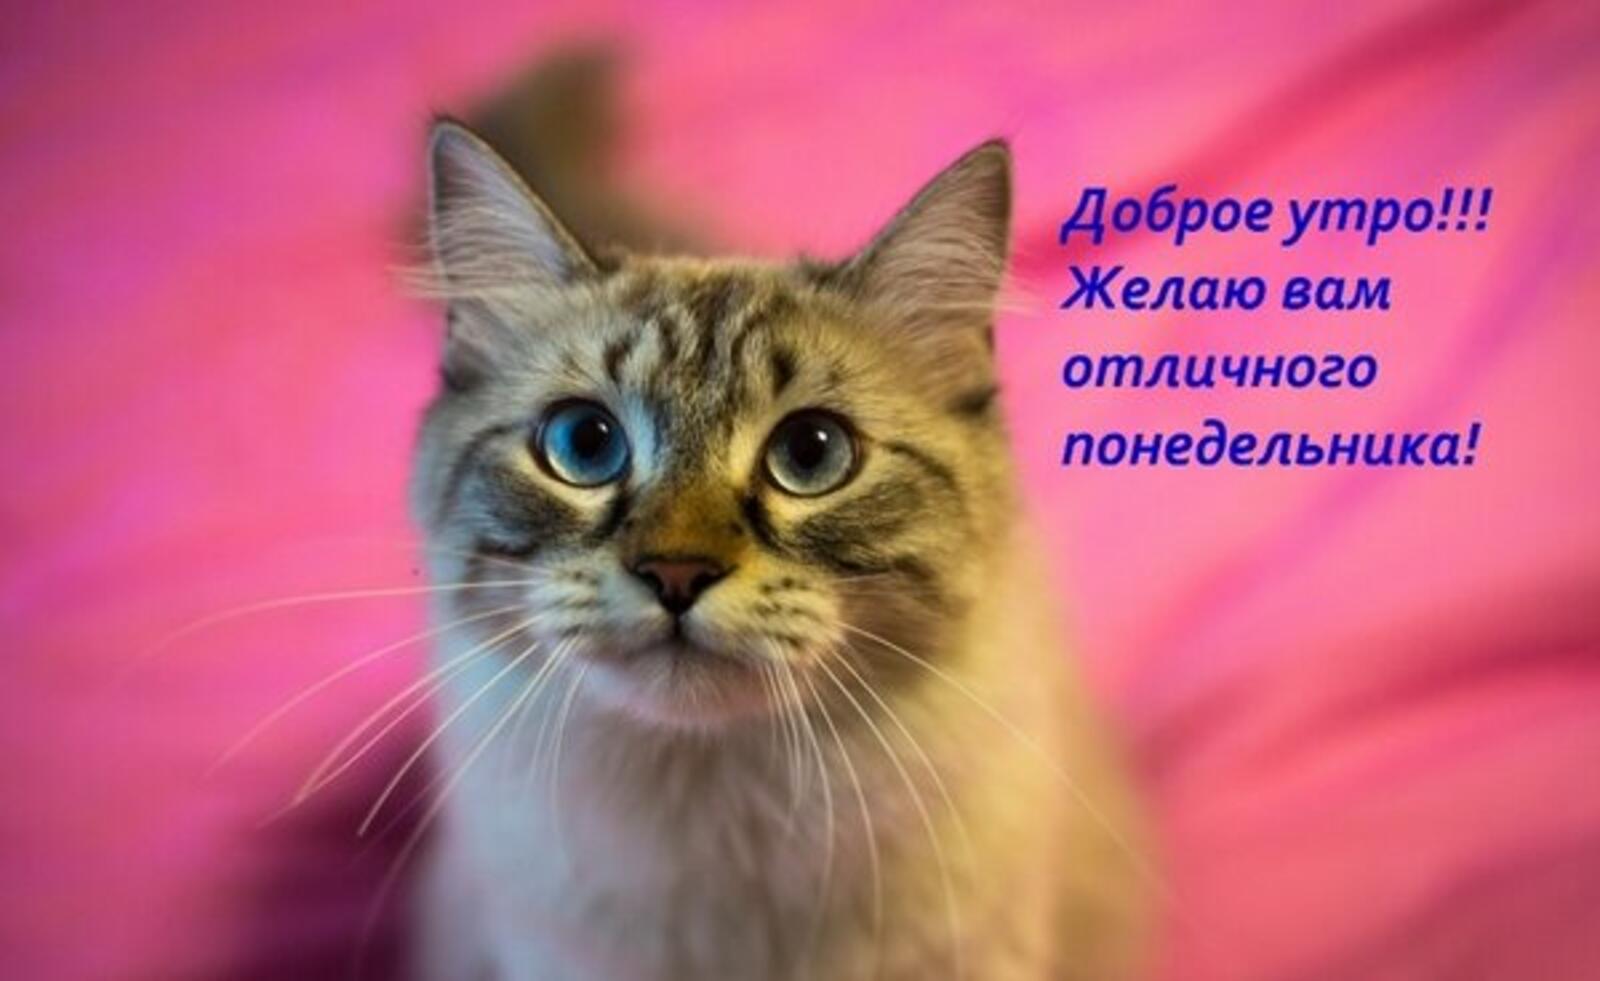 A postcard on the subject of cat text good morning wish you a great monday for free